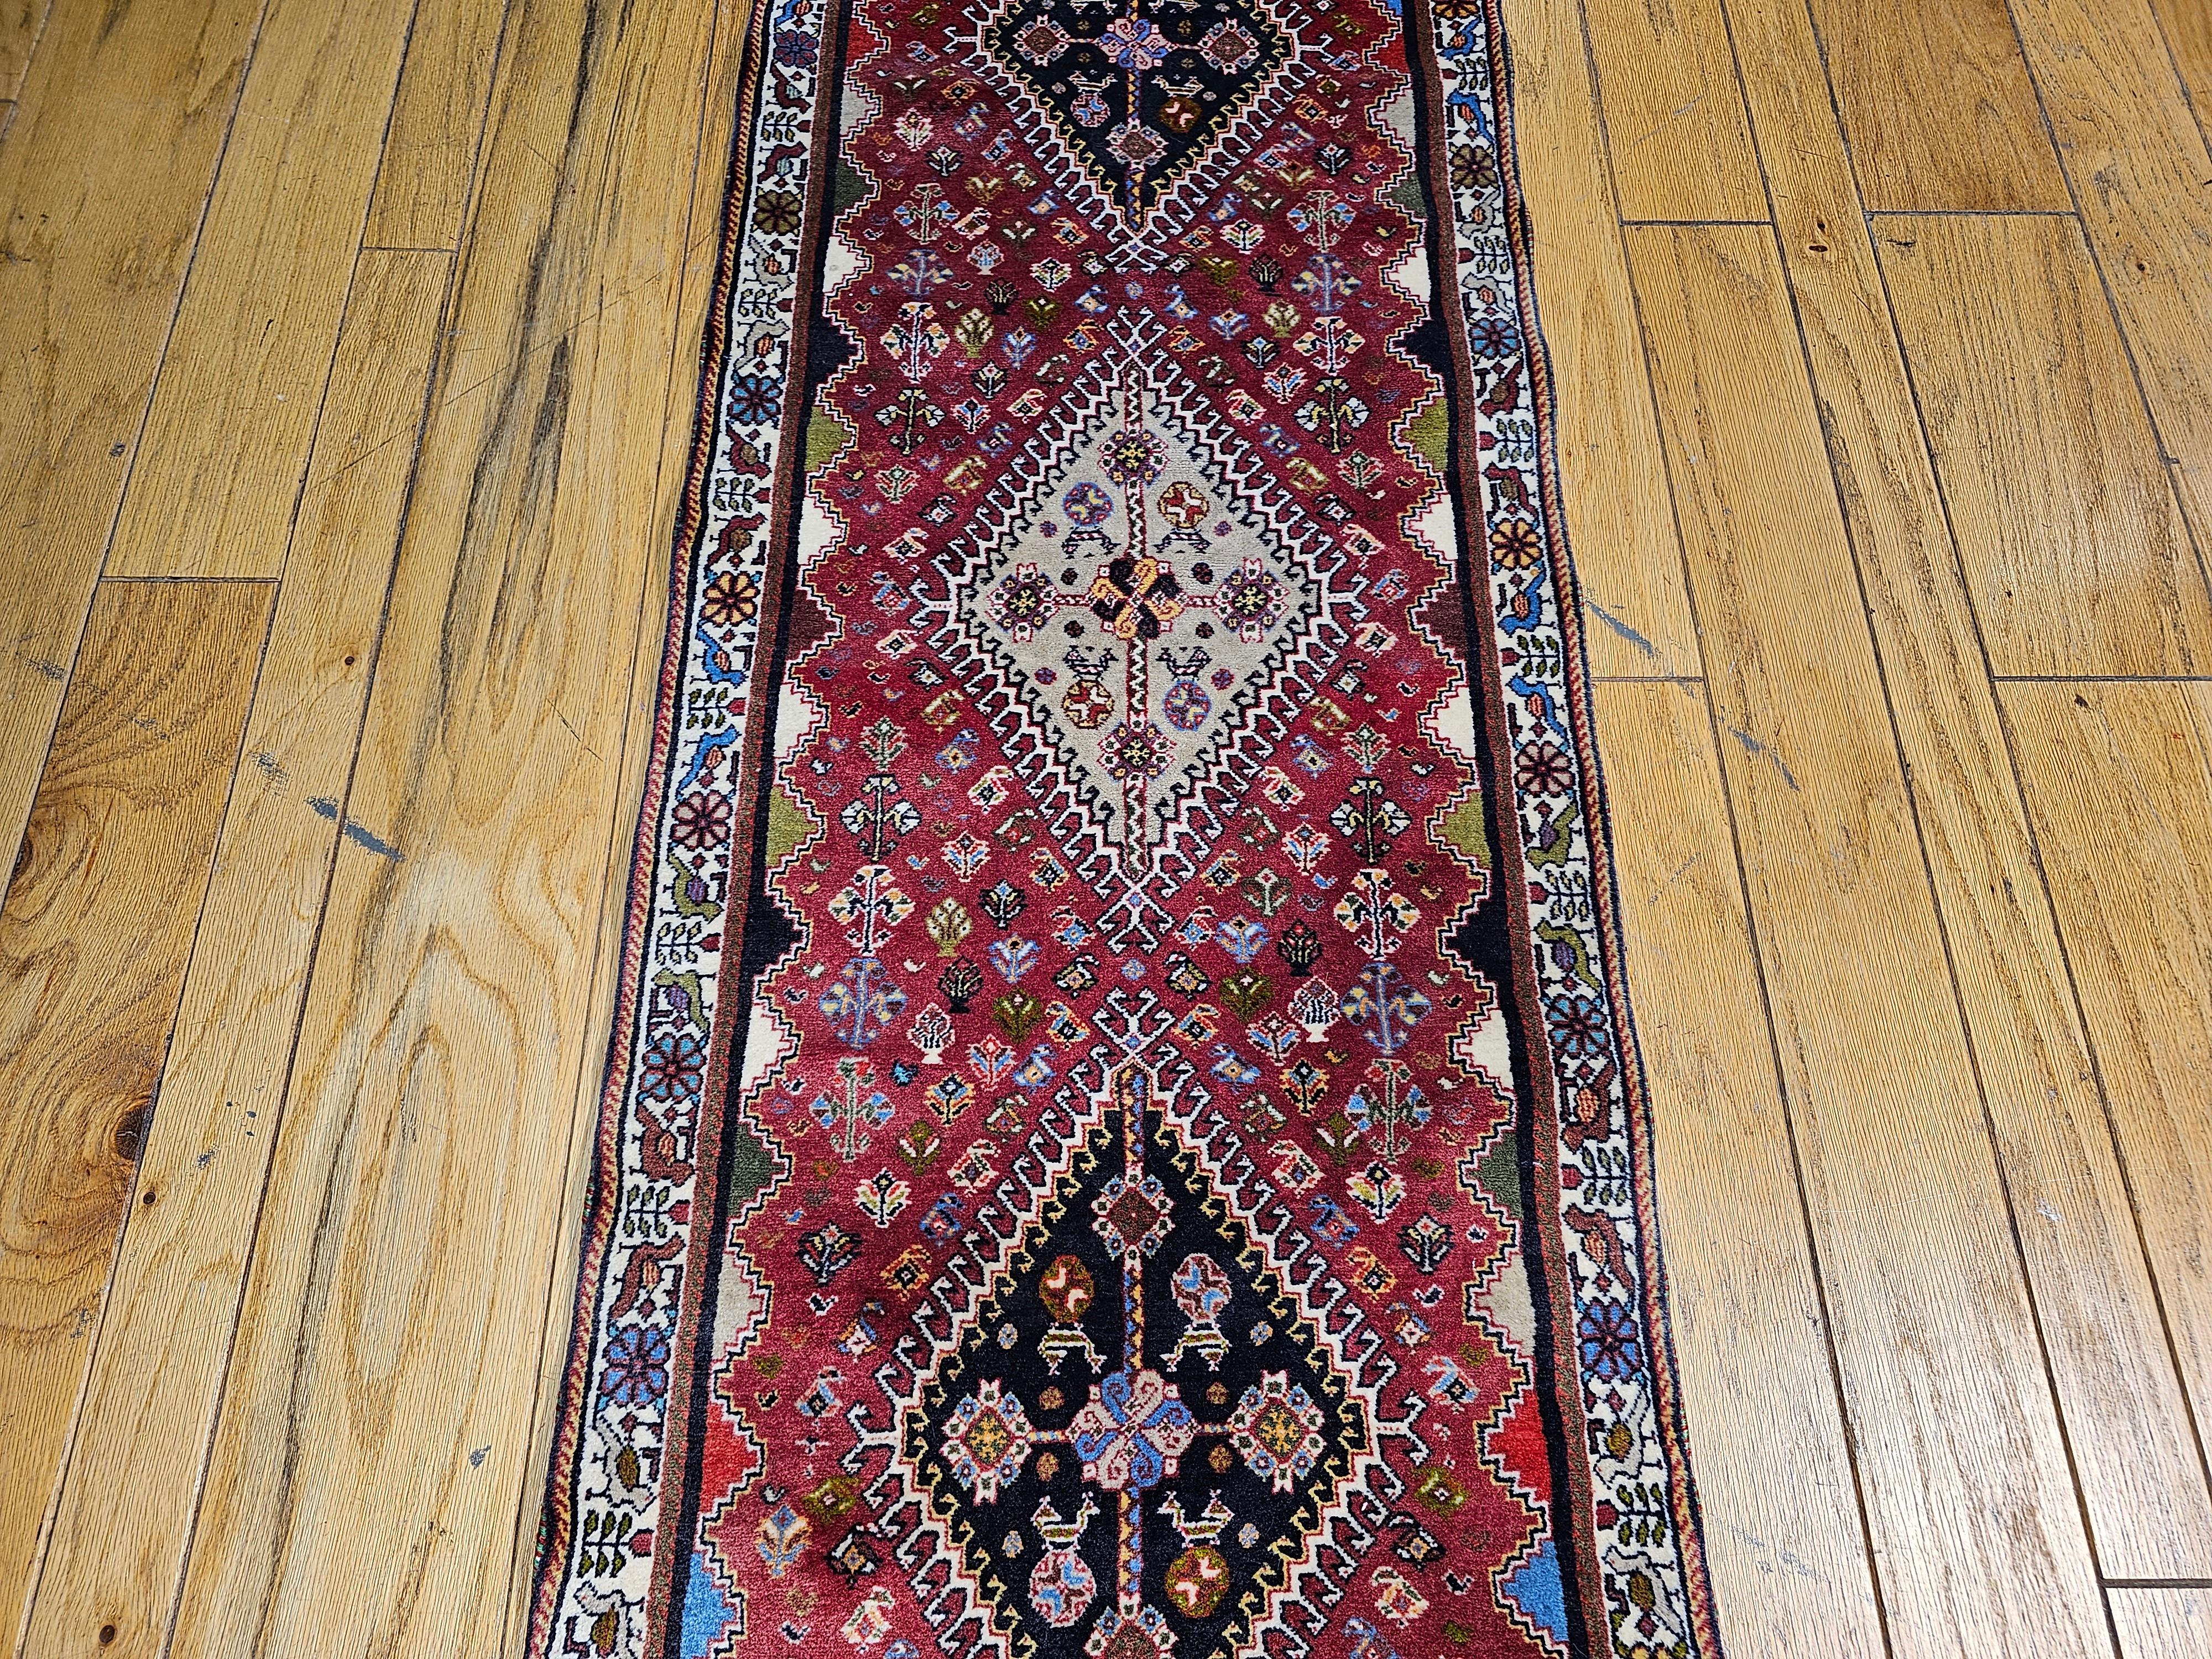 Vintage Persian Qashqai Tribal Gabbeh Runner in Red, Navy, Ivory, Blue In Excellent Condition For Sale In Barrington, IL